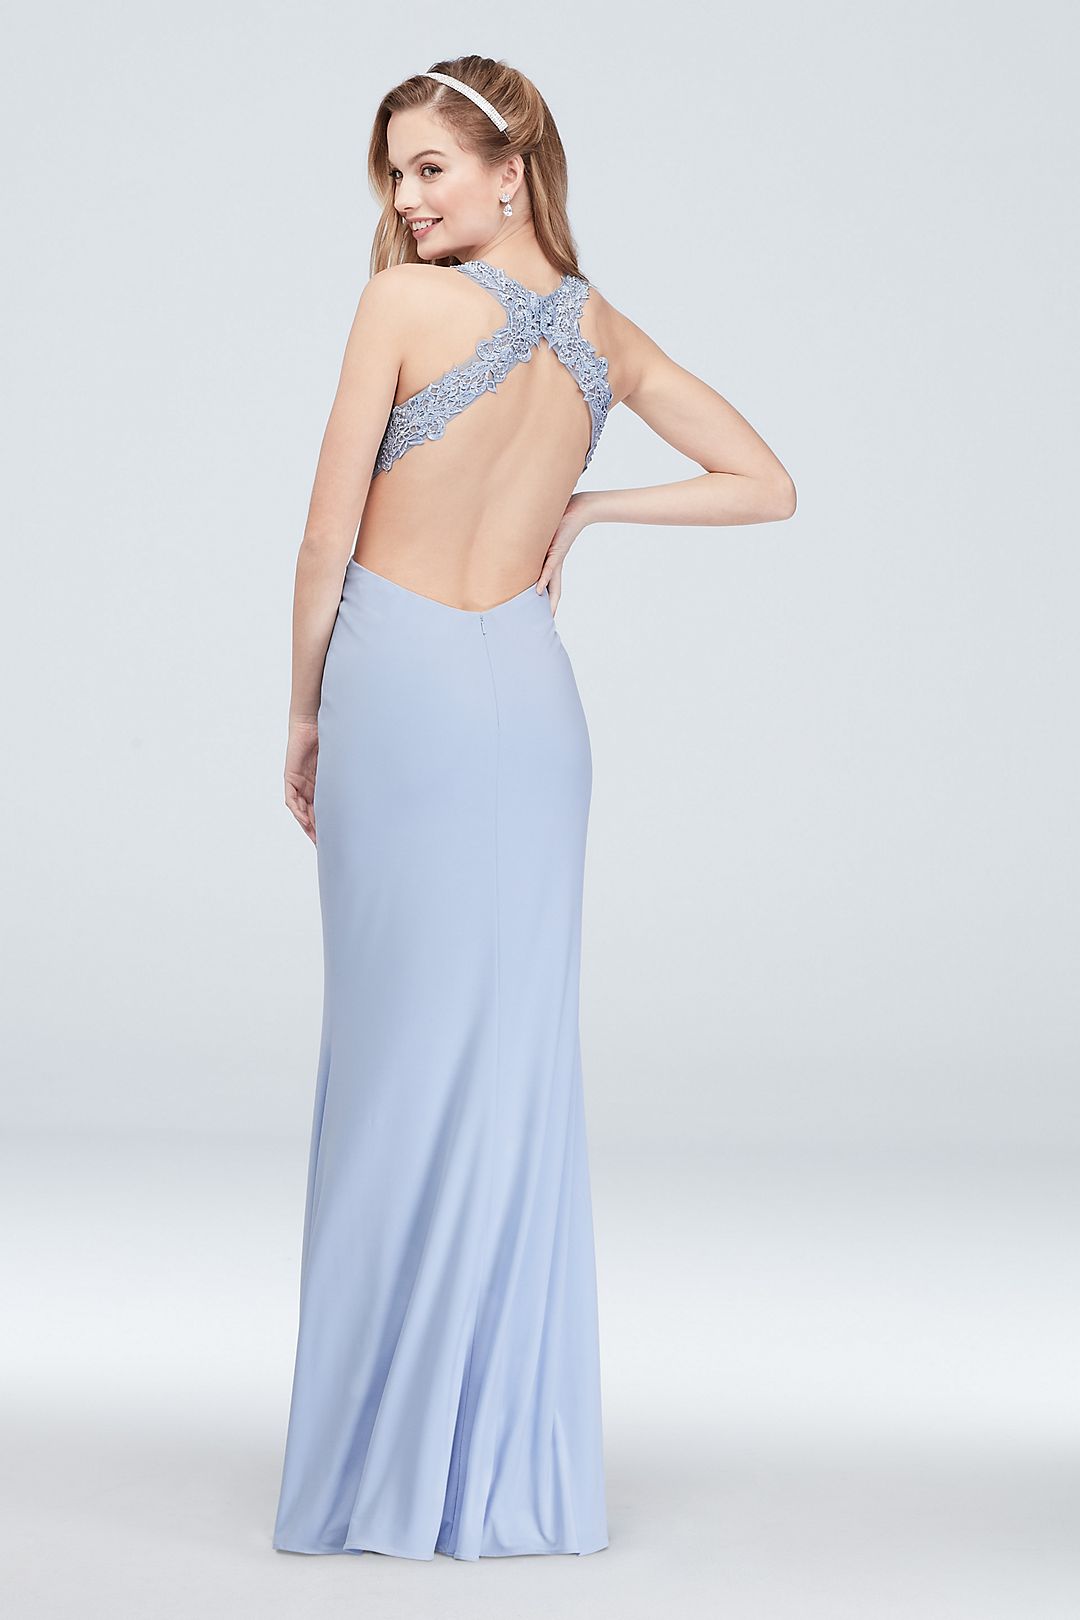 Beaded Illusion Jersey Halter Sheath Gown Image 4